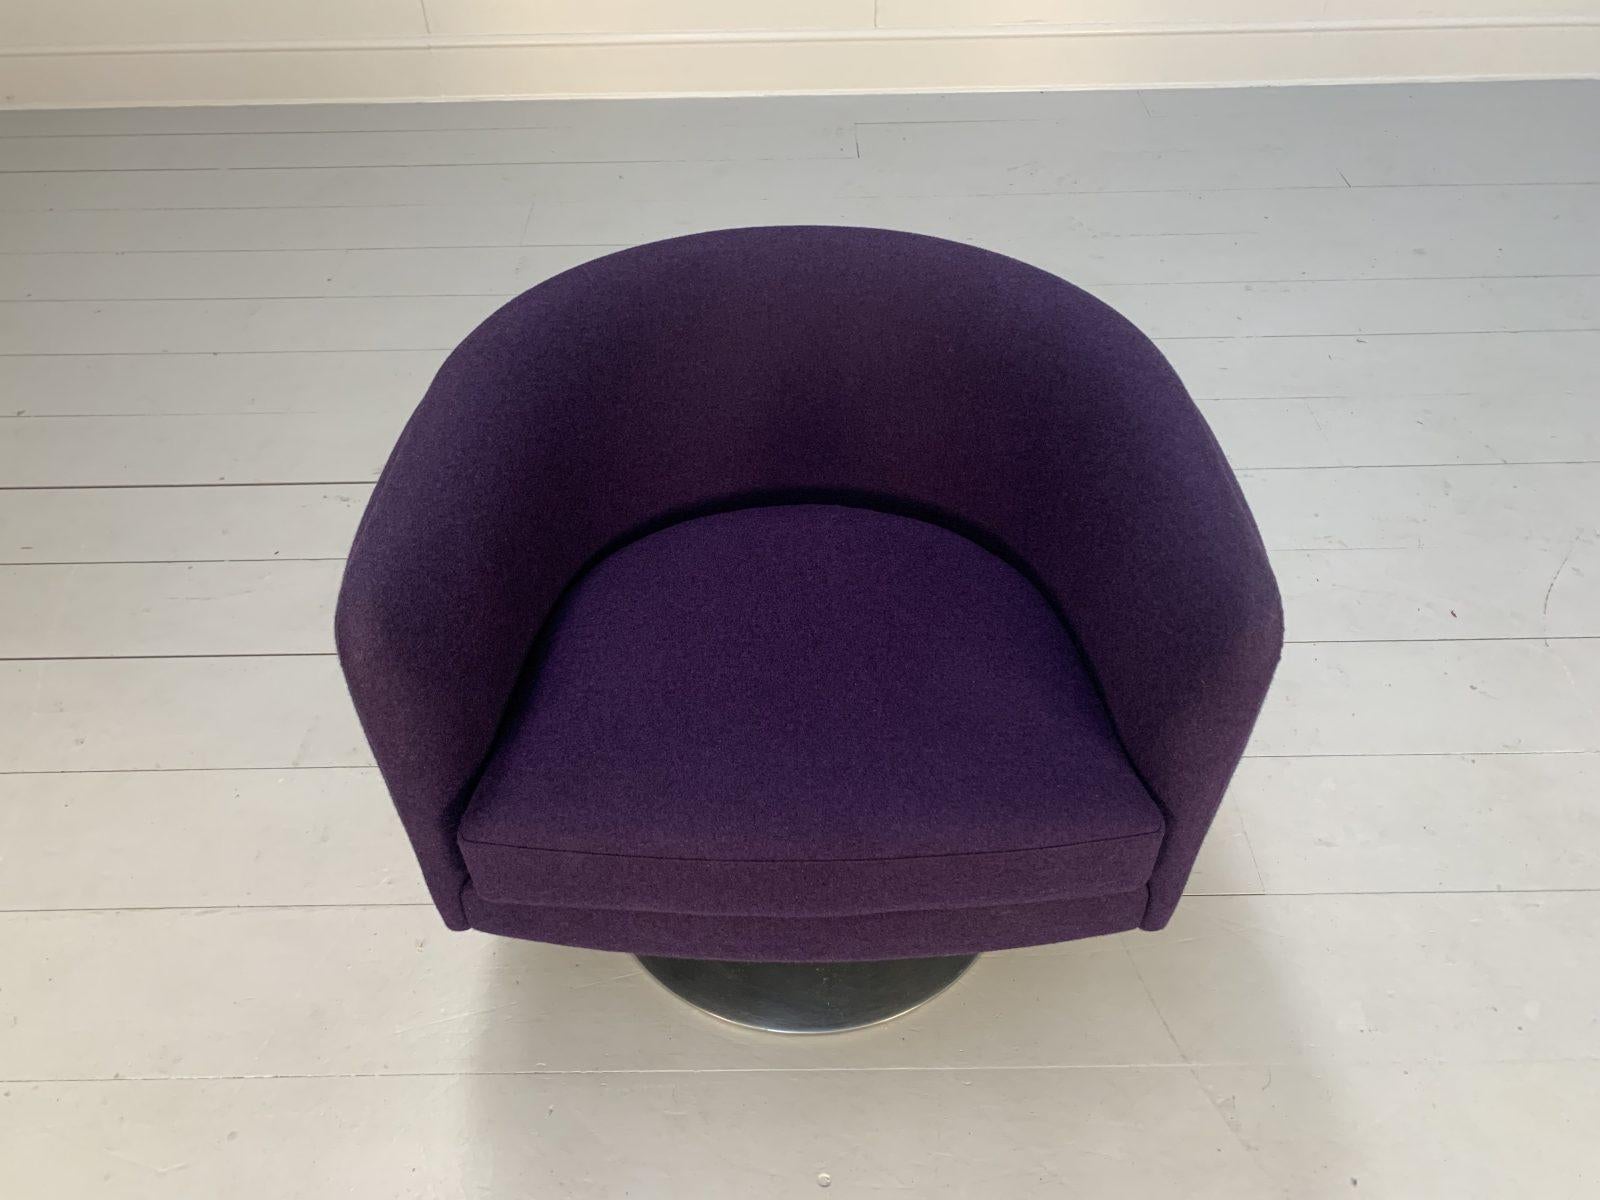 This is a rare, original “D’Urso” height-adjustable, rotating Lounge Chair, from the world renown furniture house of Knoll Studio, dressed in their sublime Knoll Wool in Deep Purple, and with a Polished Metal Base.

In a world of temporary